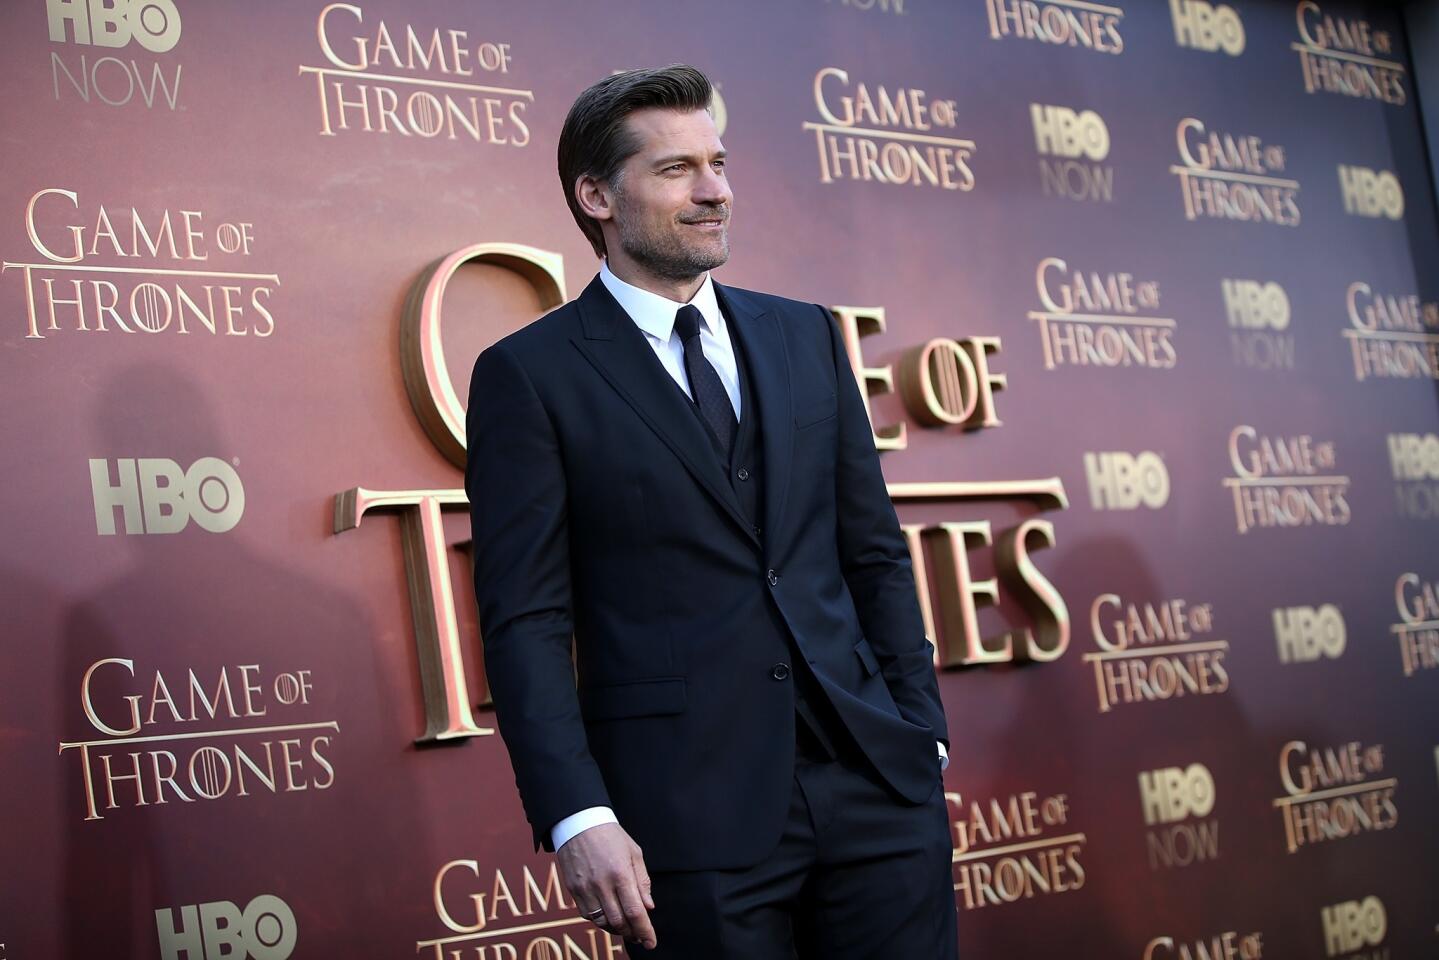 Actor Nikolaj Coster-Waldau, who plays Jamie Lannister, attends the premiere of HBO's "Game of Thrones" Season 5 at San Francisco Opera House.